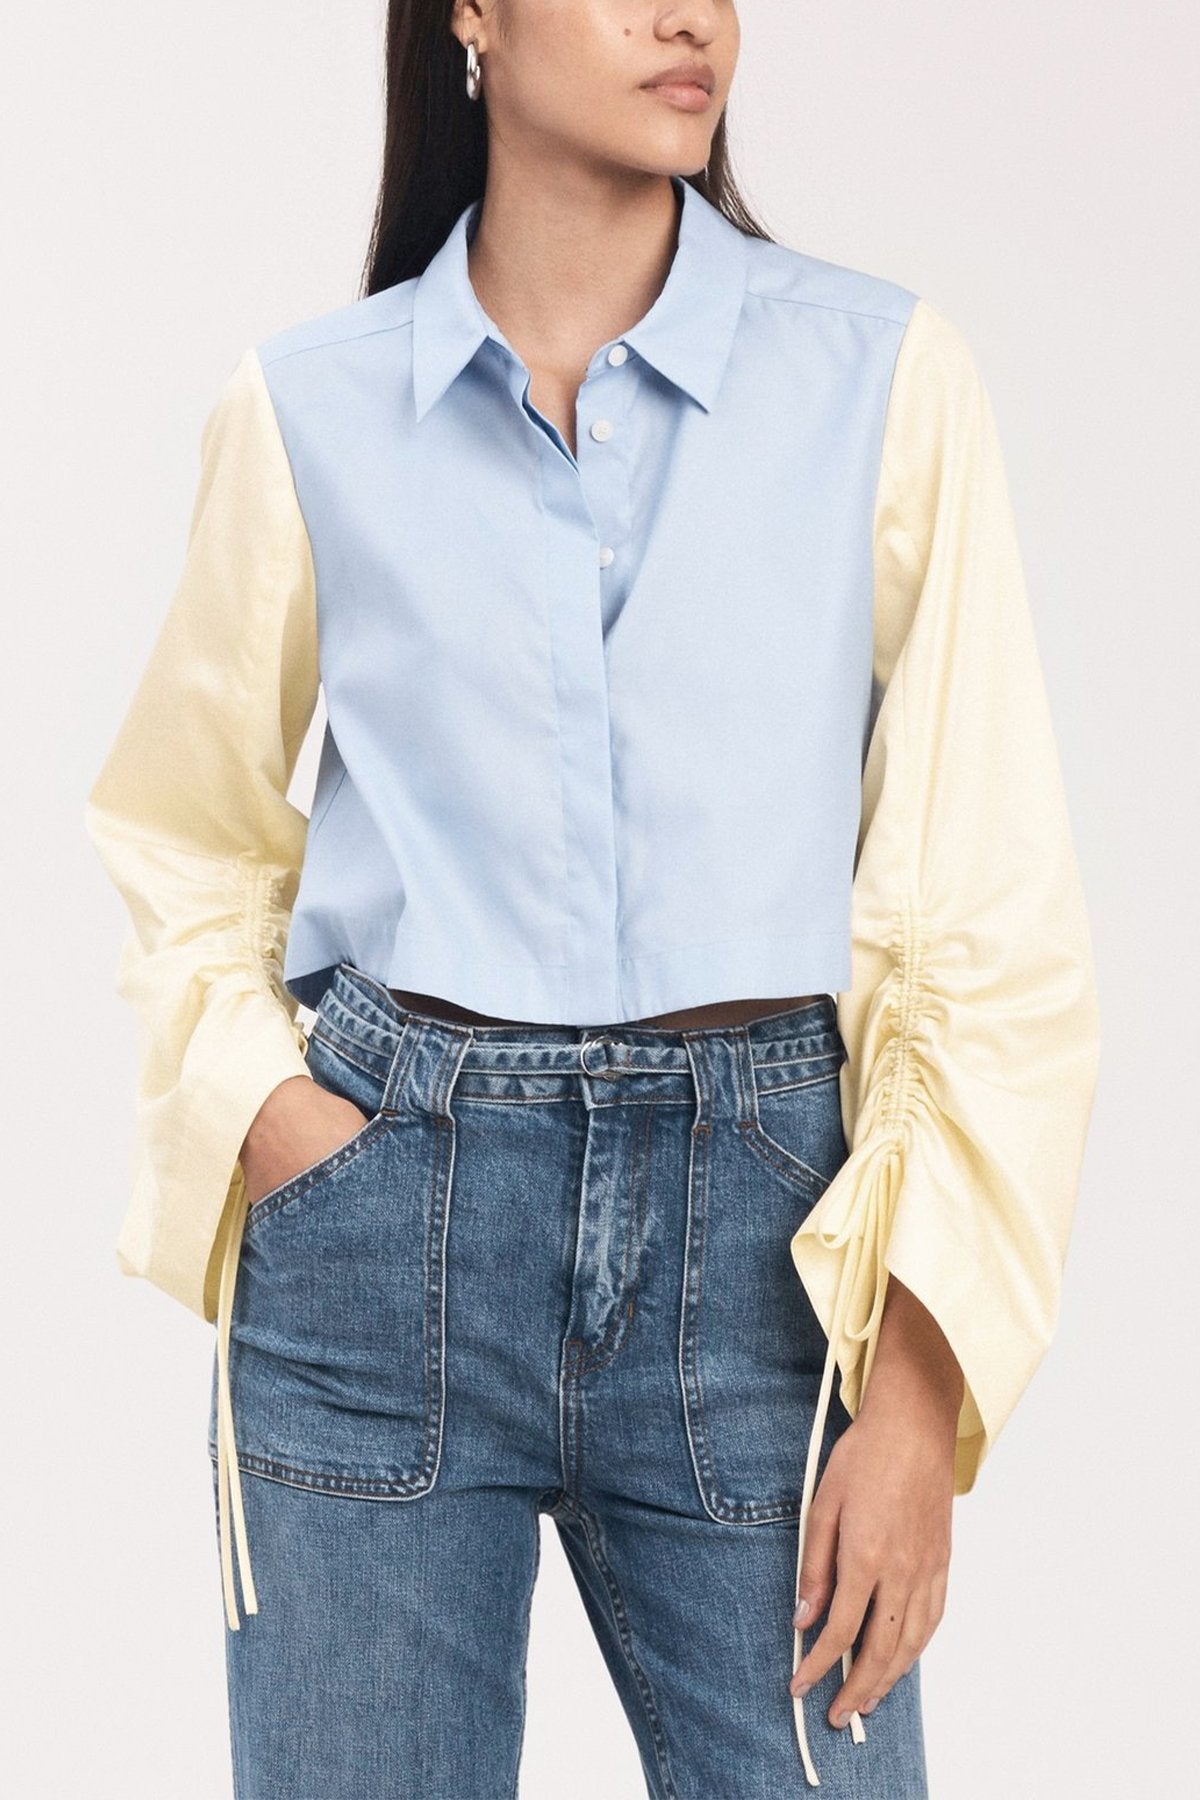 Kinsley Blouse Top in Light Blue and Pale Yellow - shop-olivia.com